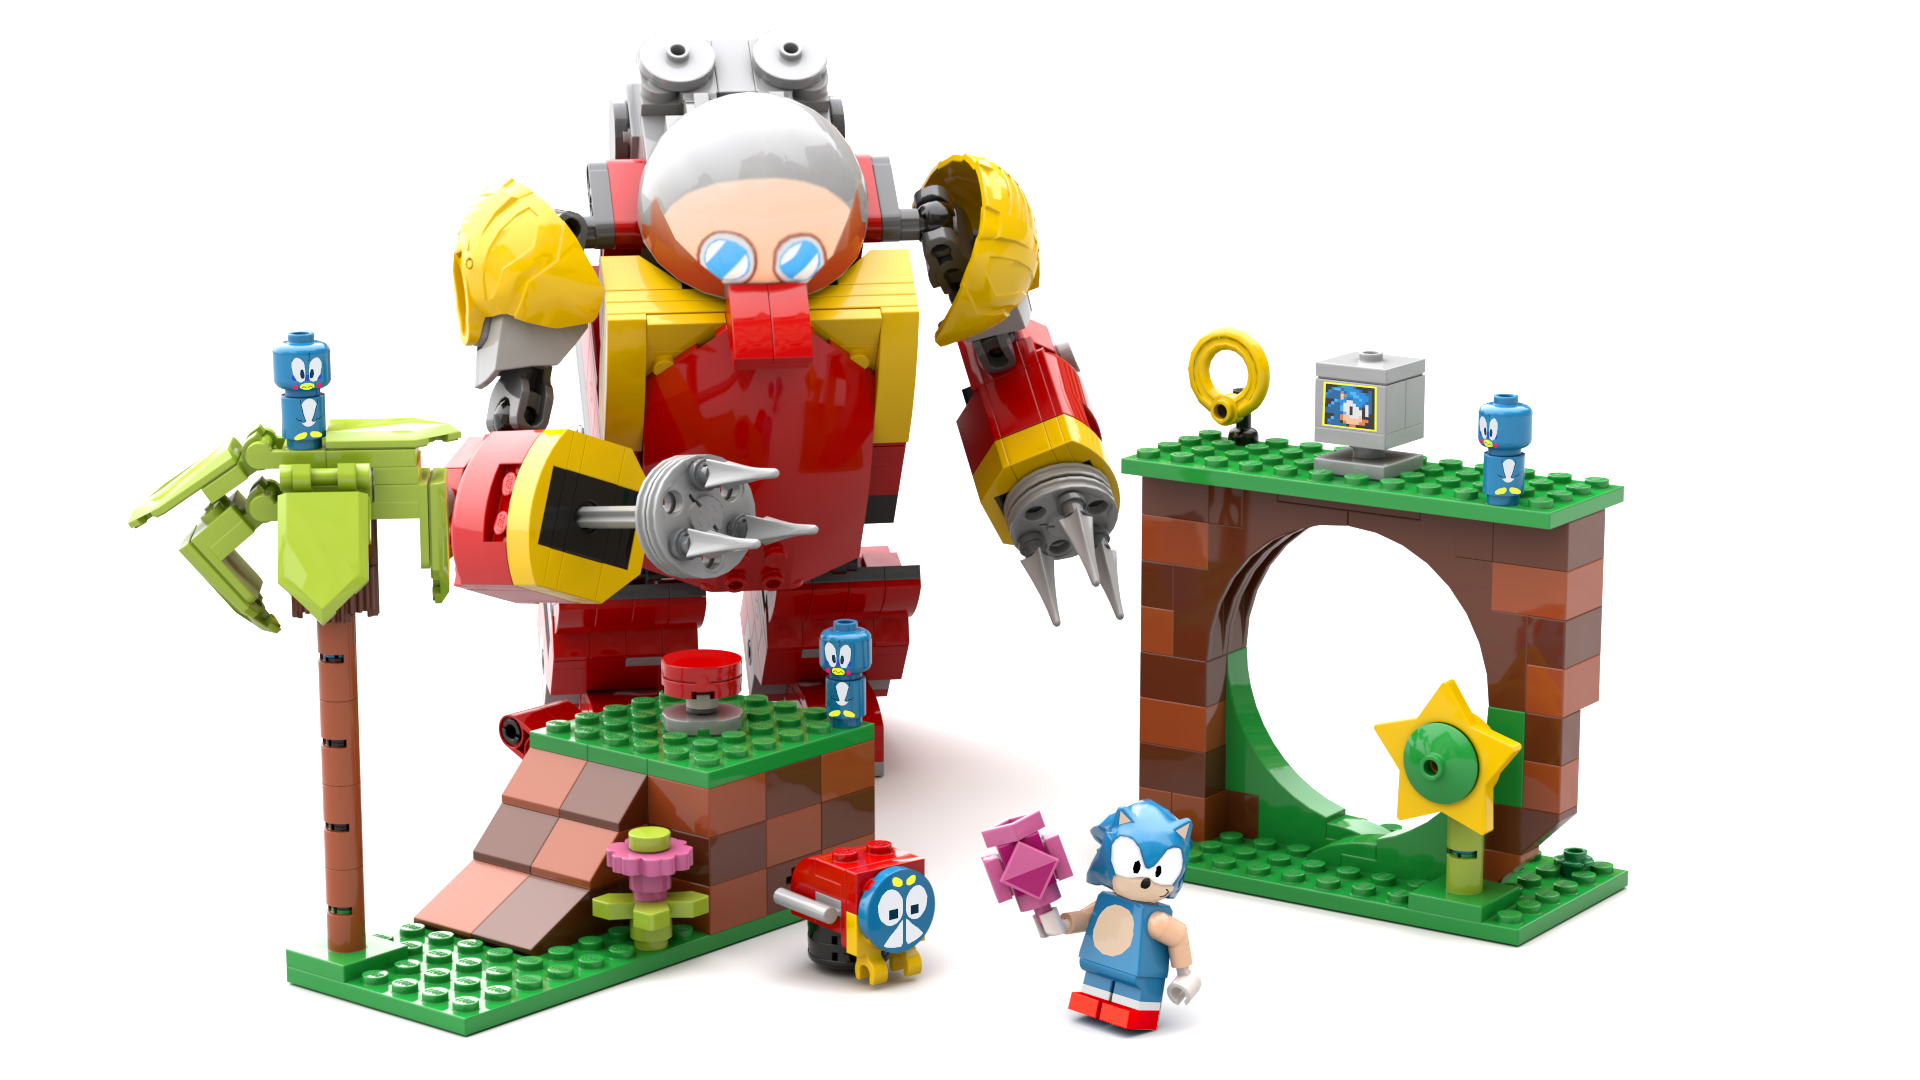 Image for This incredible Sonic the Hedgehog Lego set could release if fans vote for it